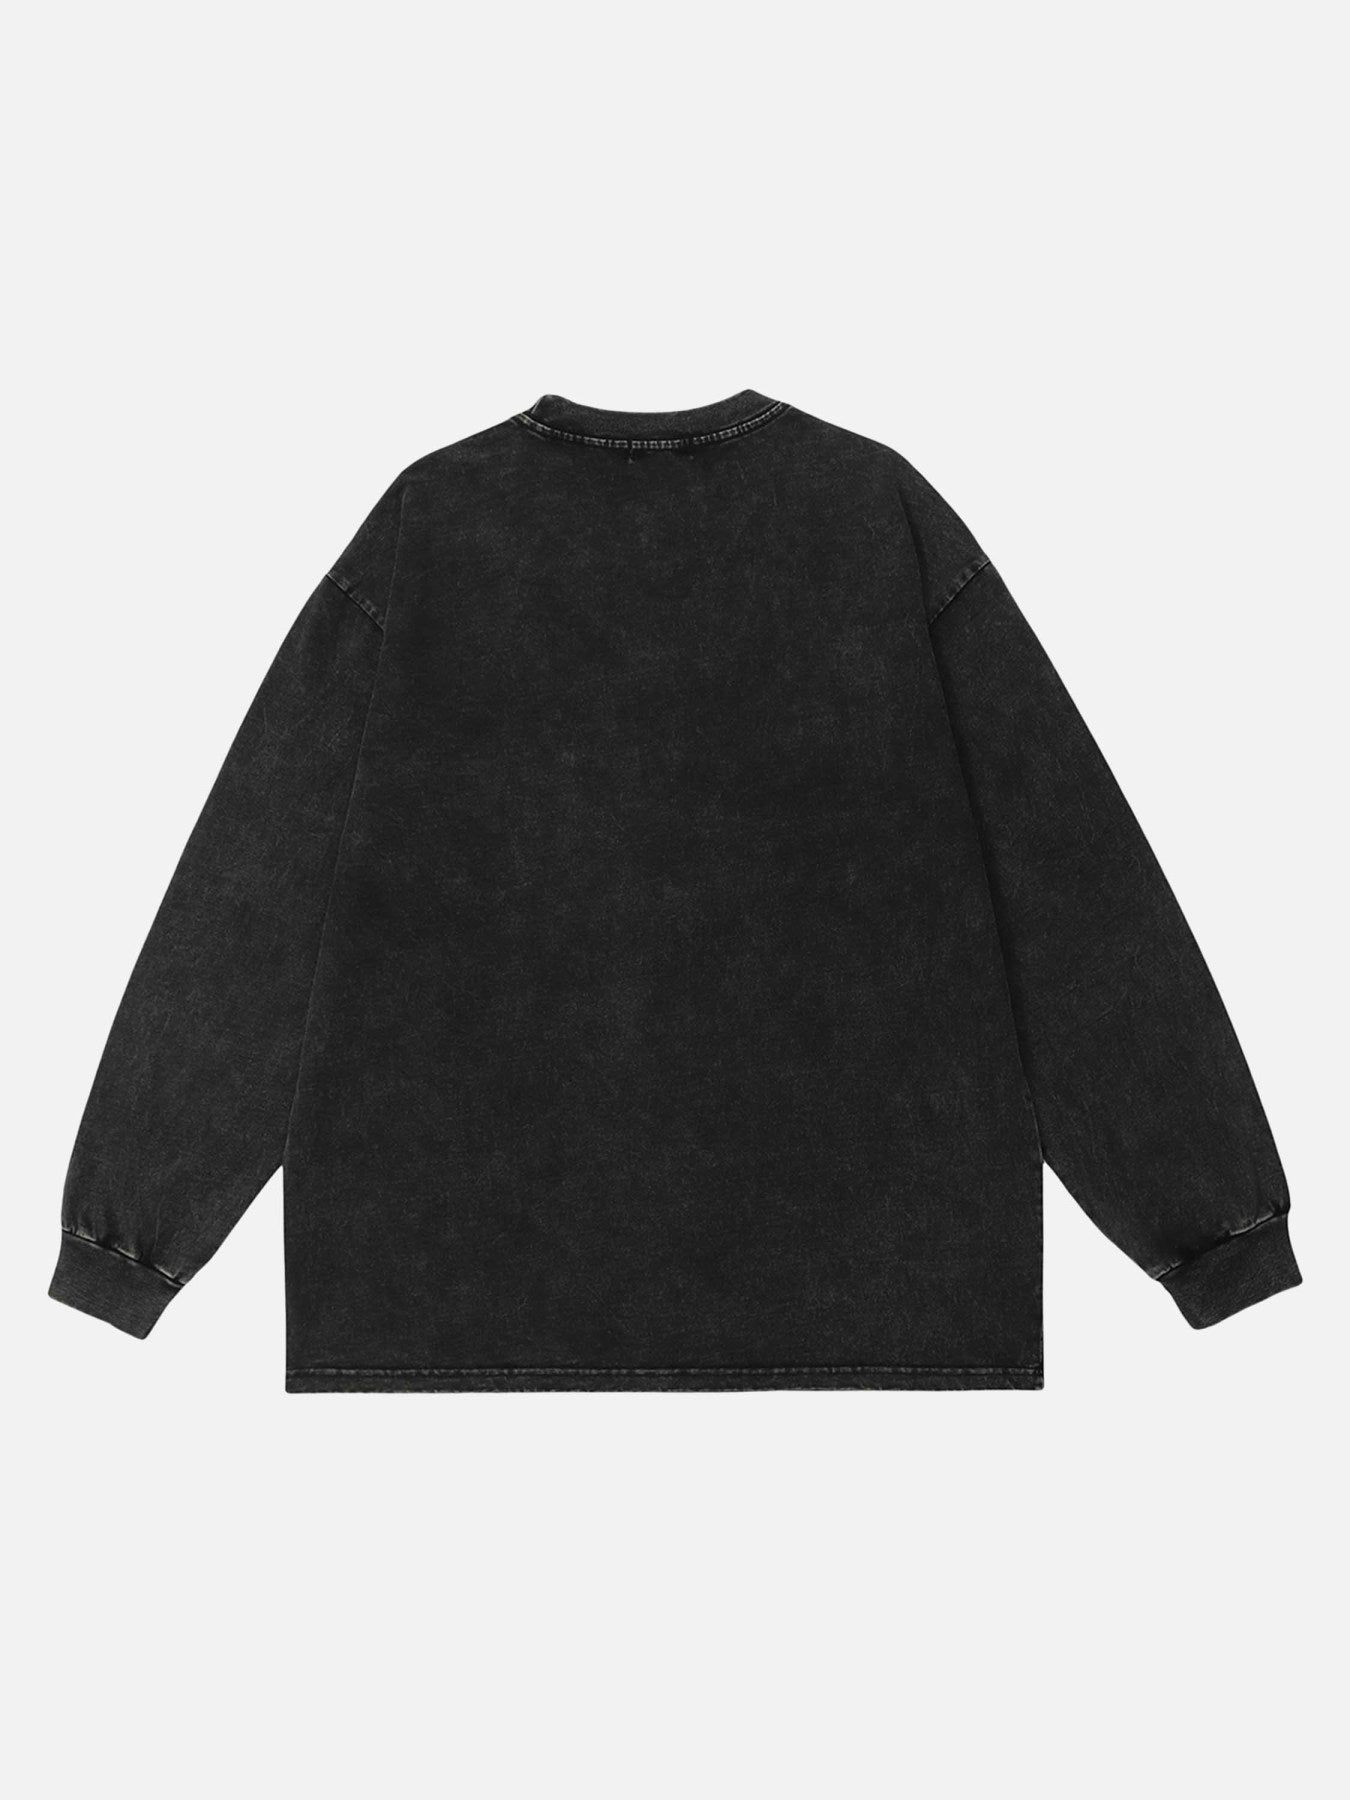 Thesupermade Niche Washed And Aged Long Sleeve T-Shirt